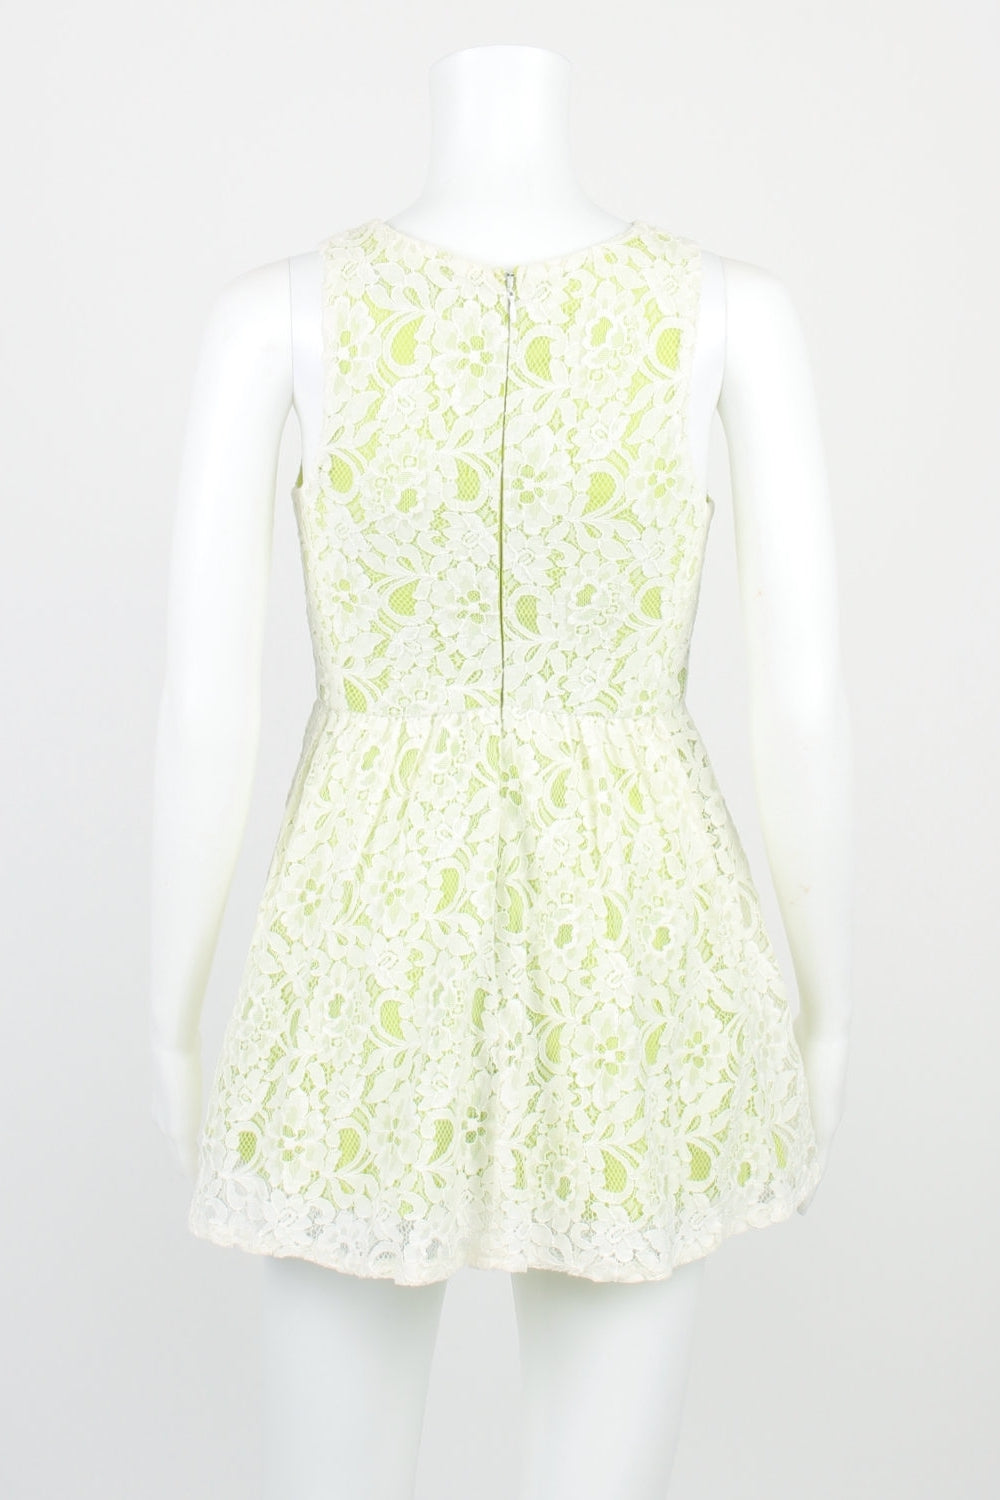 Topshop White And Green Sleeveless Lace Dress 6